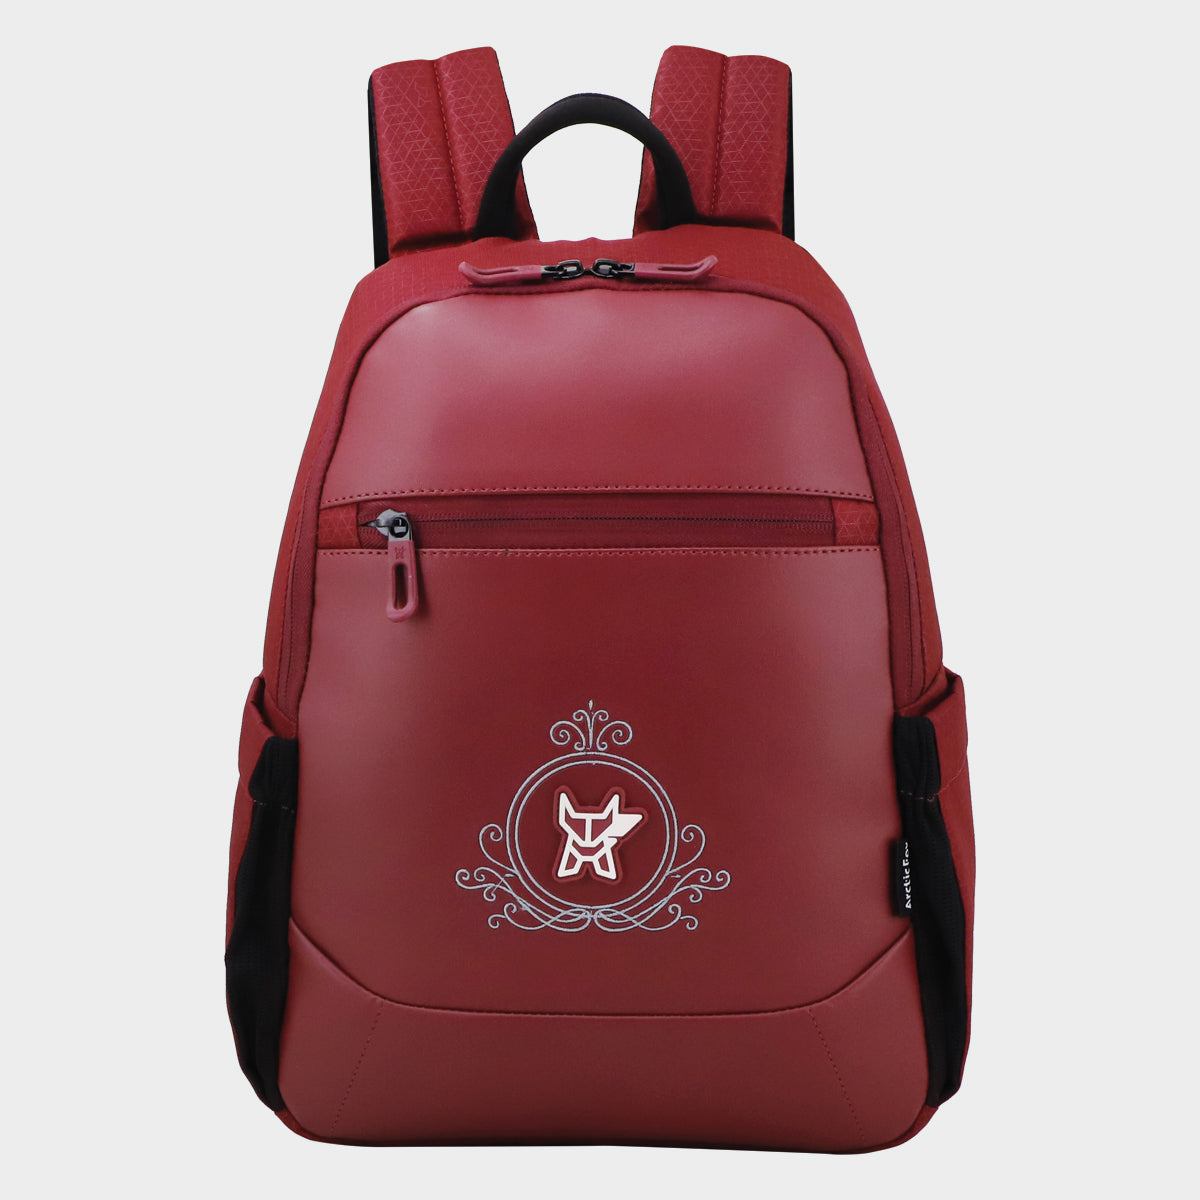 School And College Bags in Dandeli at best price by A R Enterprises -  Justdial